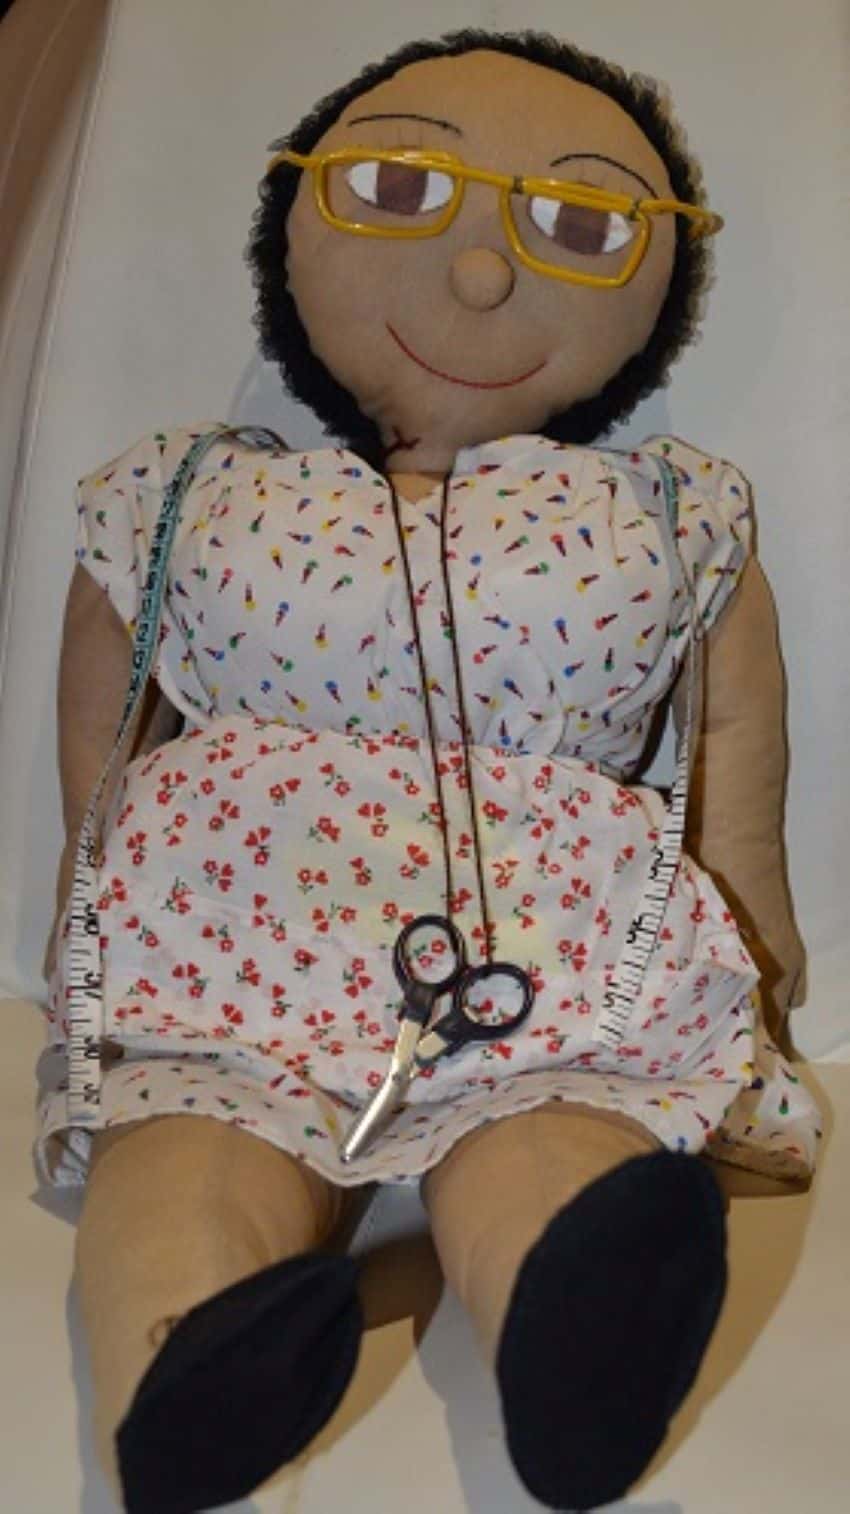 One version of the Victoria doll from the collection of organizer Tessa Brisac